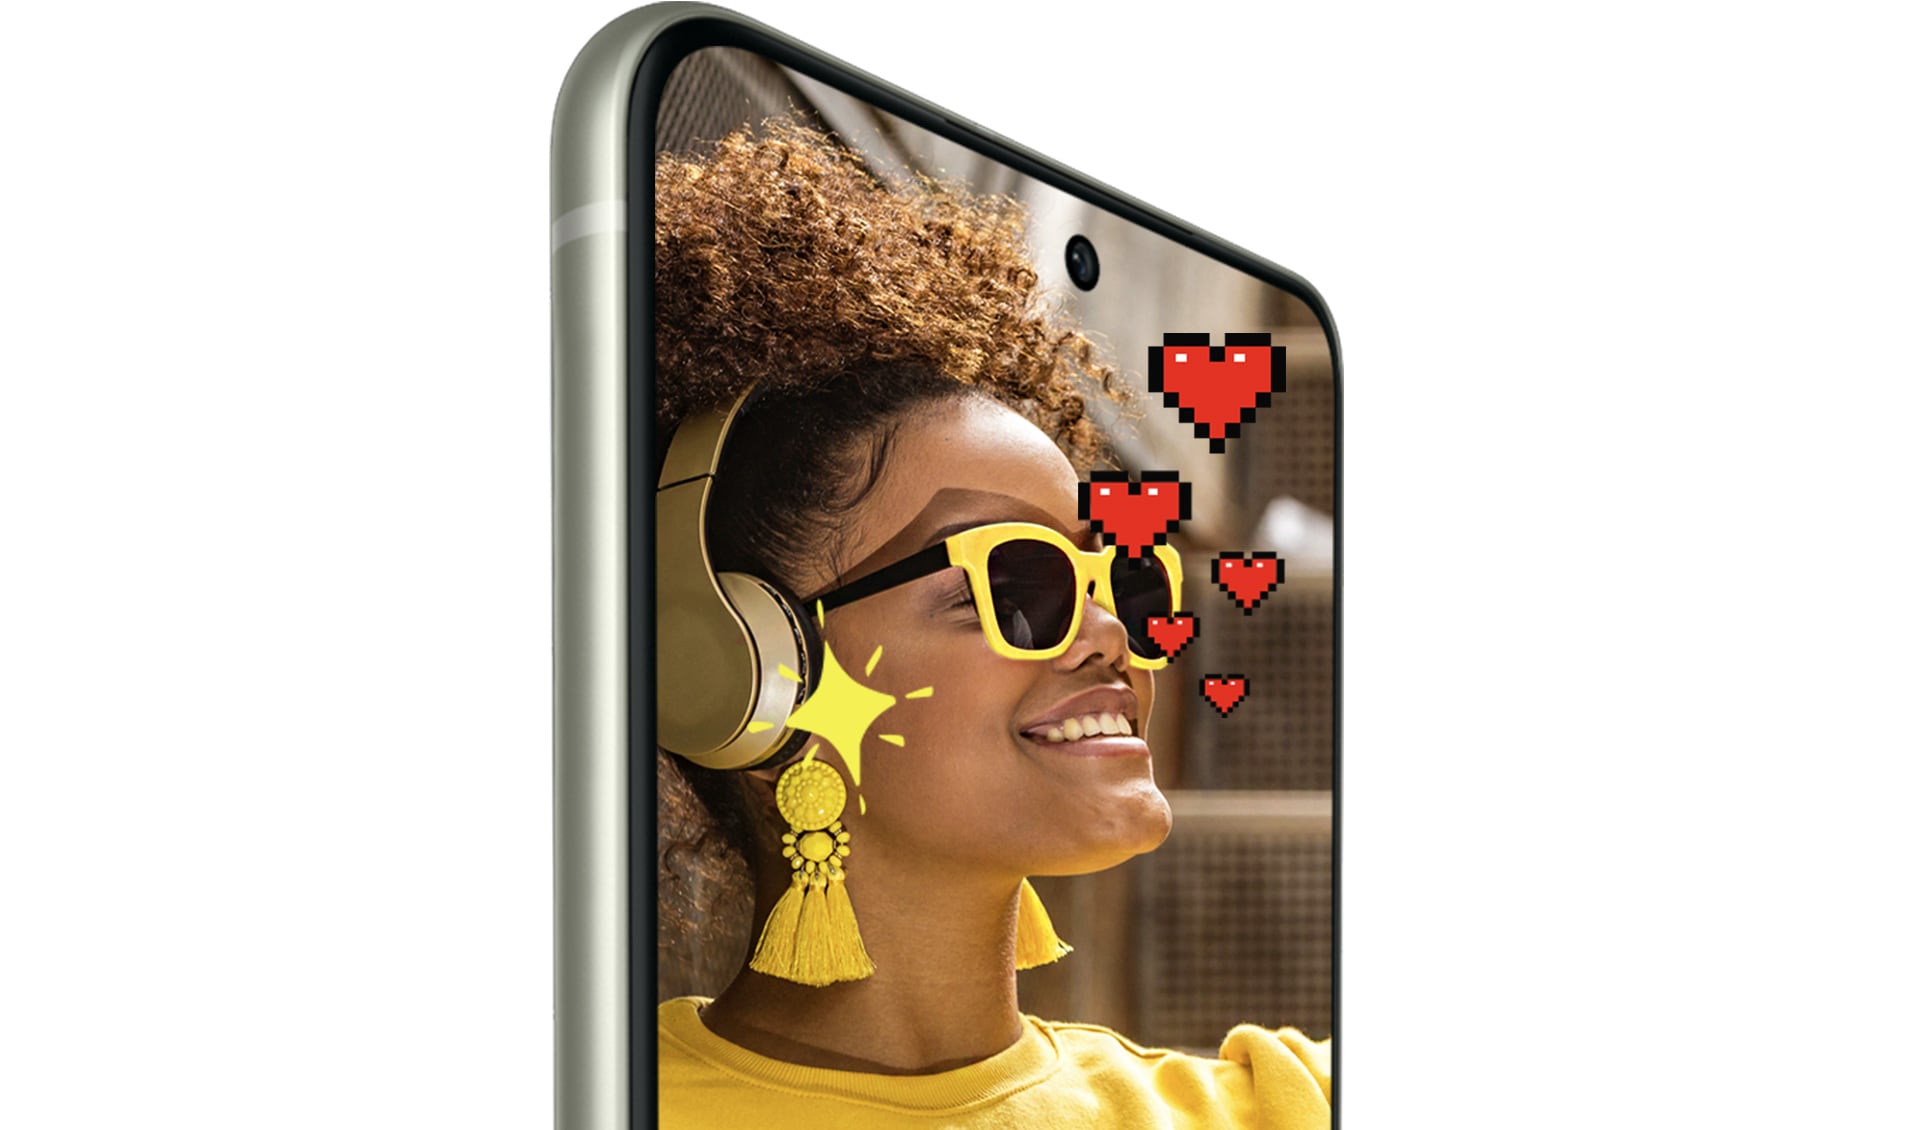 Galaxy S21 FE 5G seen from the front at an angle with hearts and a woman in sunglasses onscreen.